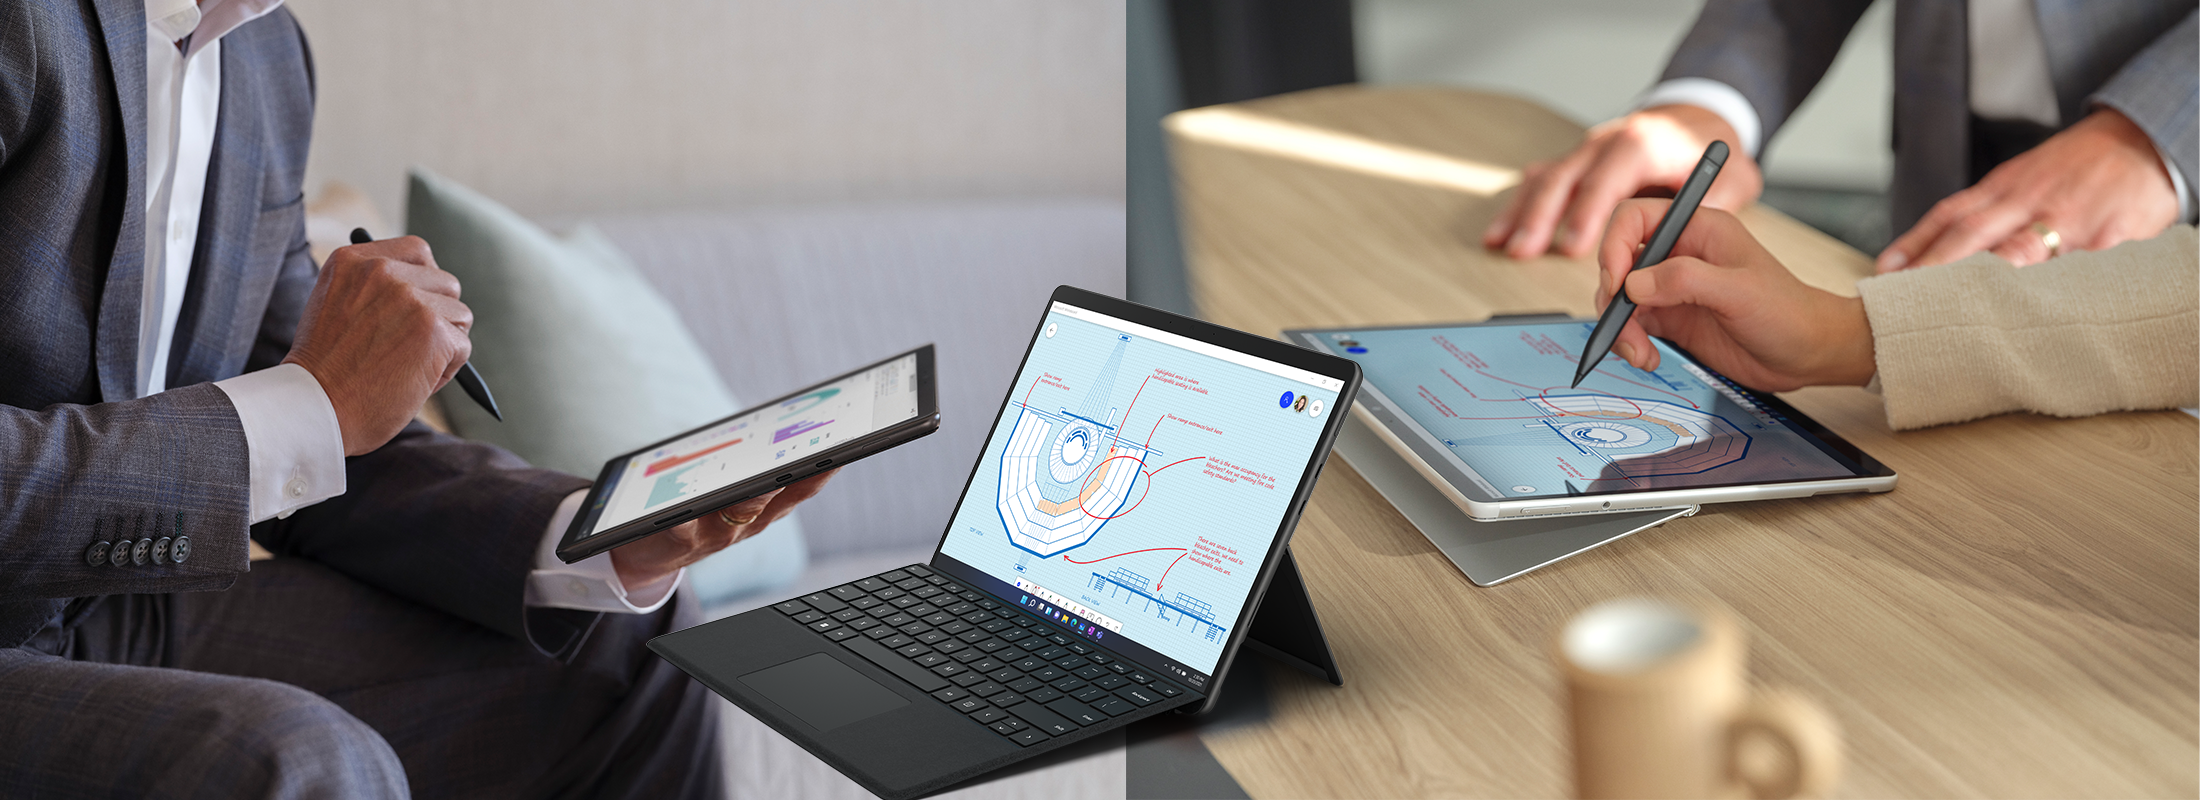 A collage shows two images of the Surface Pro 8 